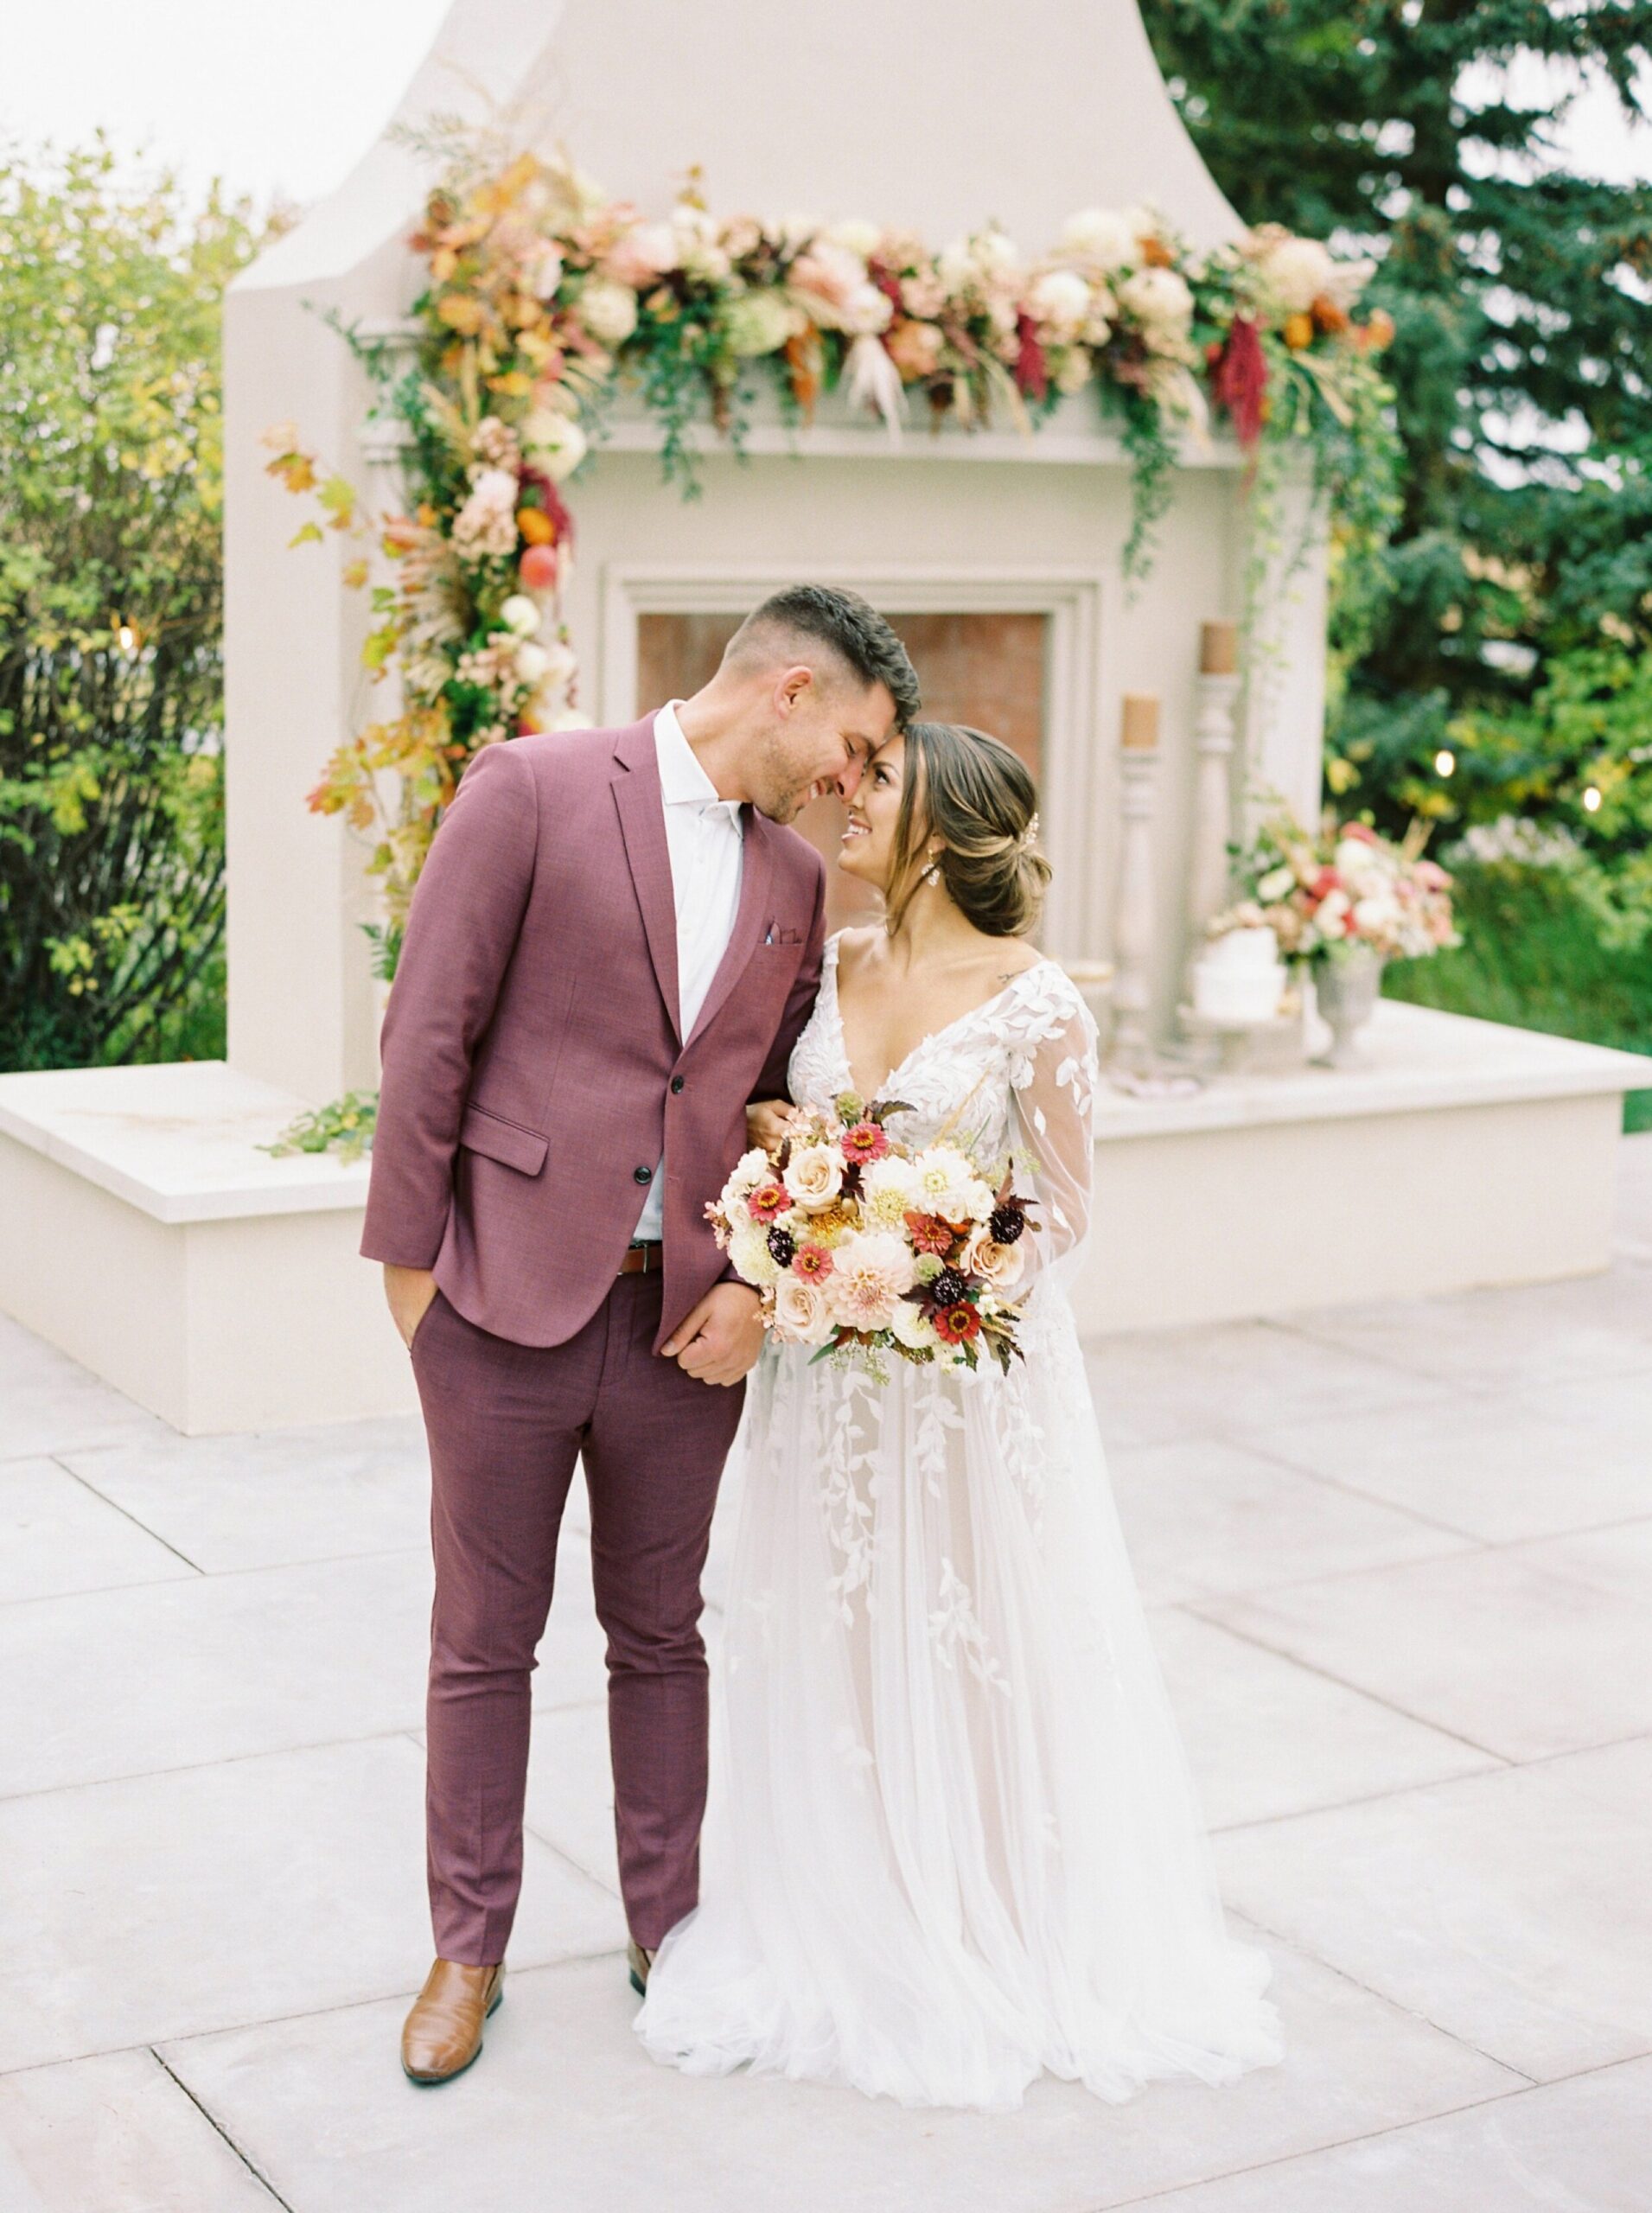  wedding couple pose ideas | different colored suits | red burgandy suit | warm tone wedding editorial in okotoks at Primrose Lifestyle | calgary fine art film wedding photographer 